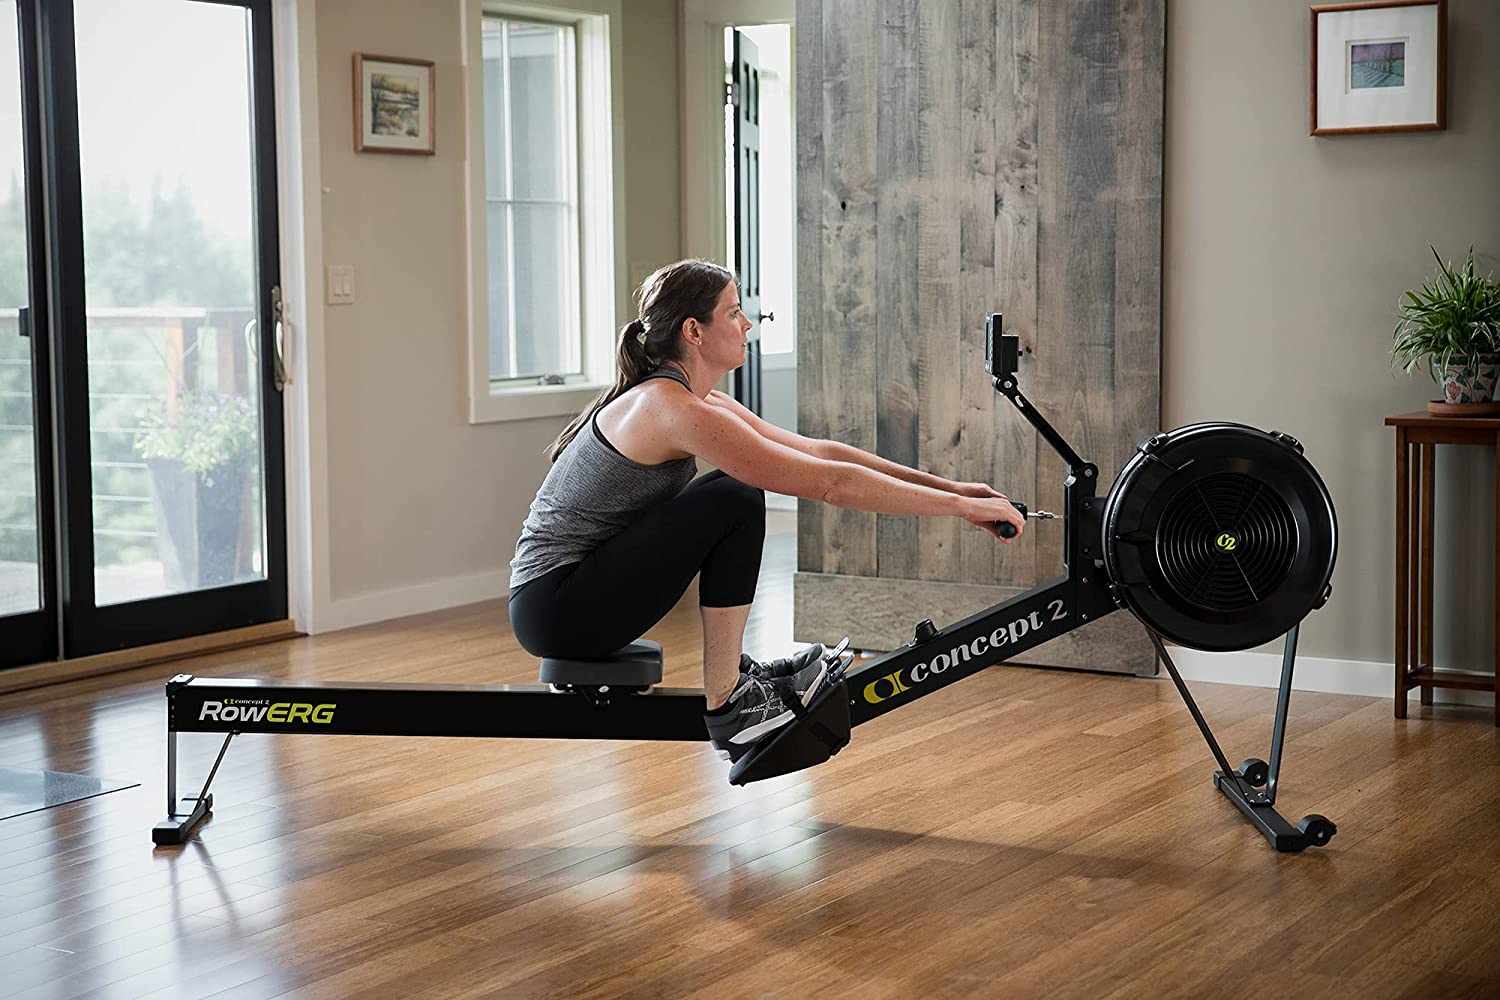 Concept2 Model D Indoor Rowing Machine with PM5 Performance Monitor